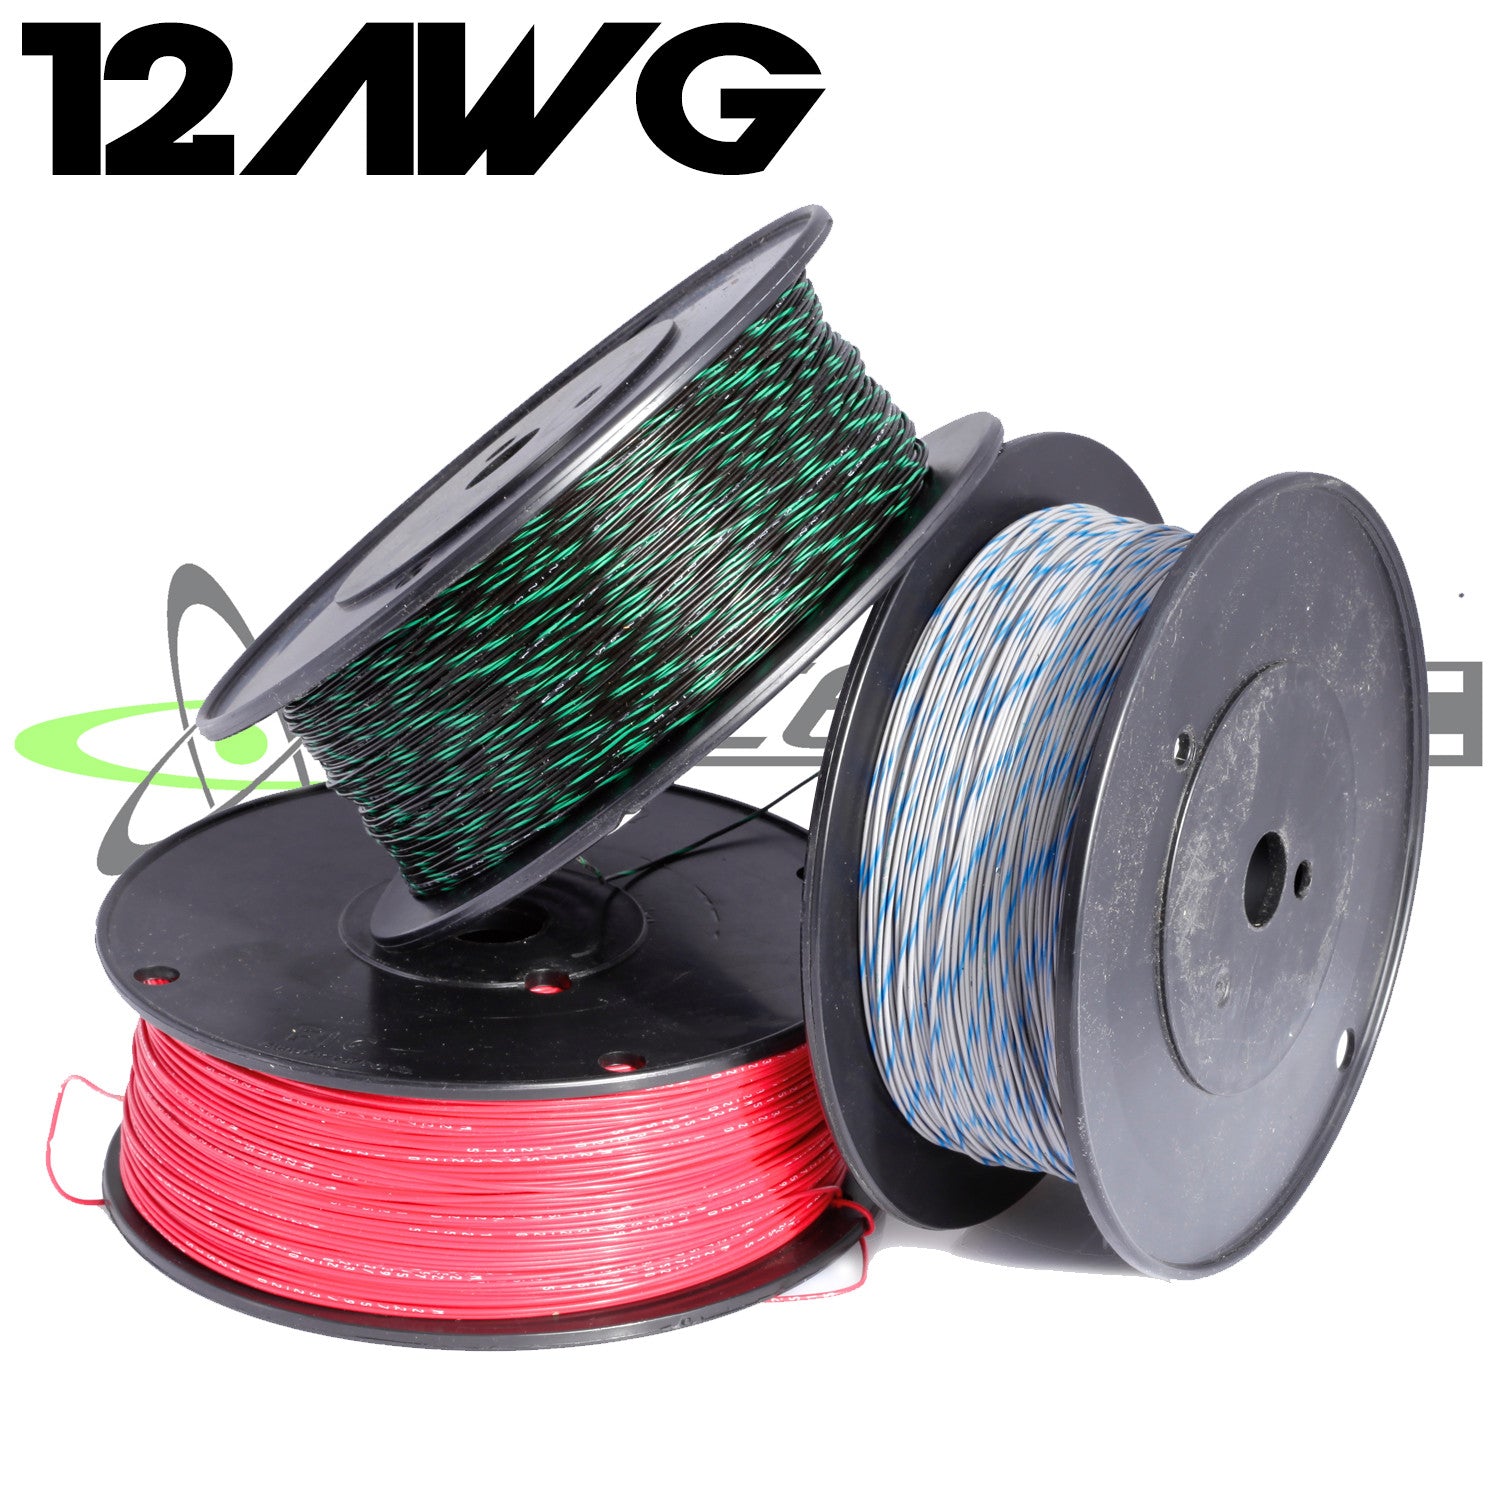 High temperature wire,16 AWG, 25' roll.